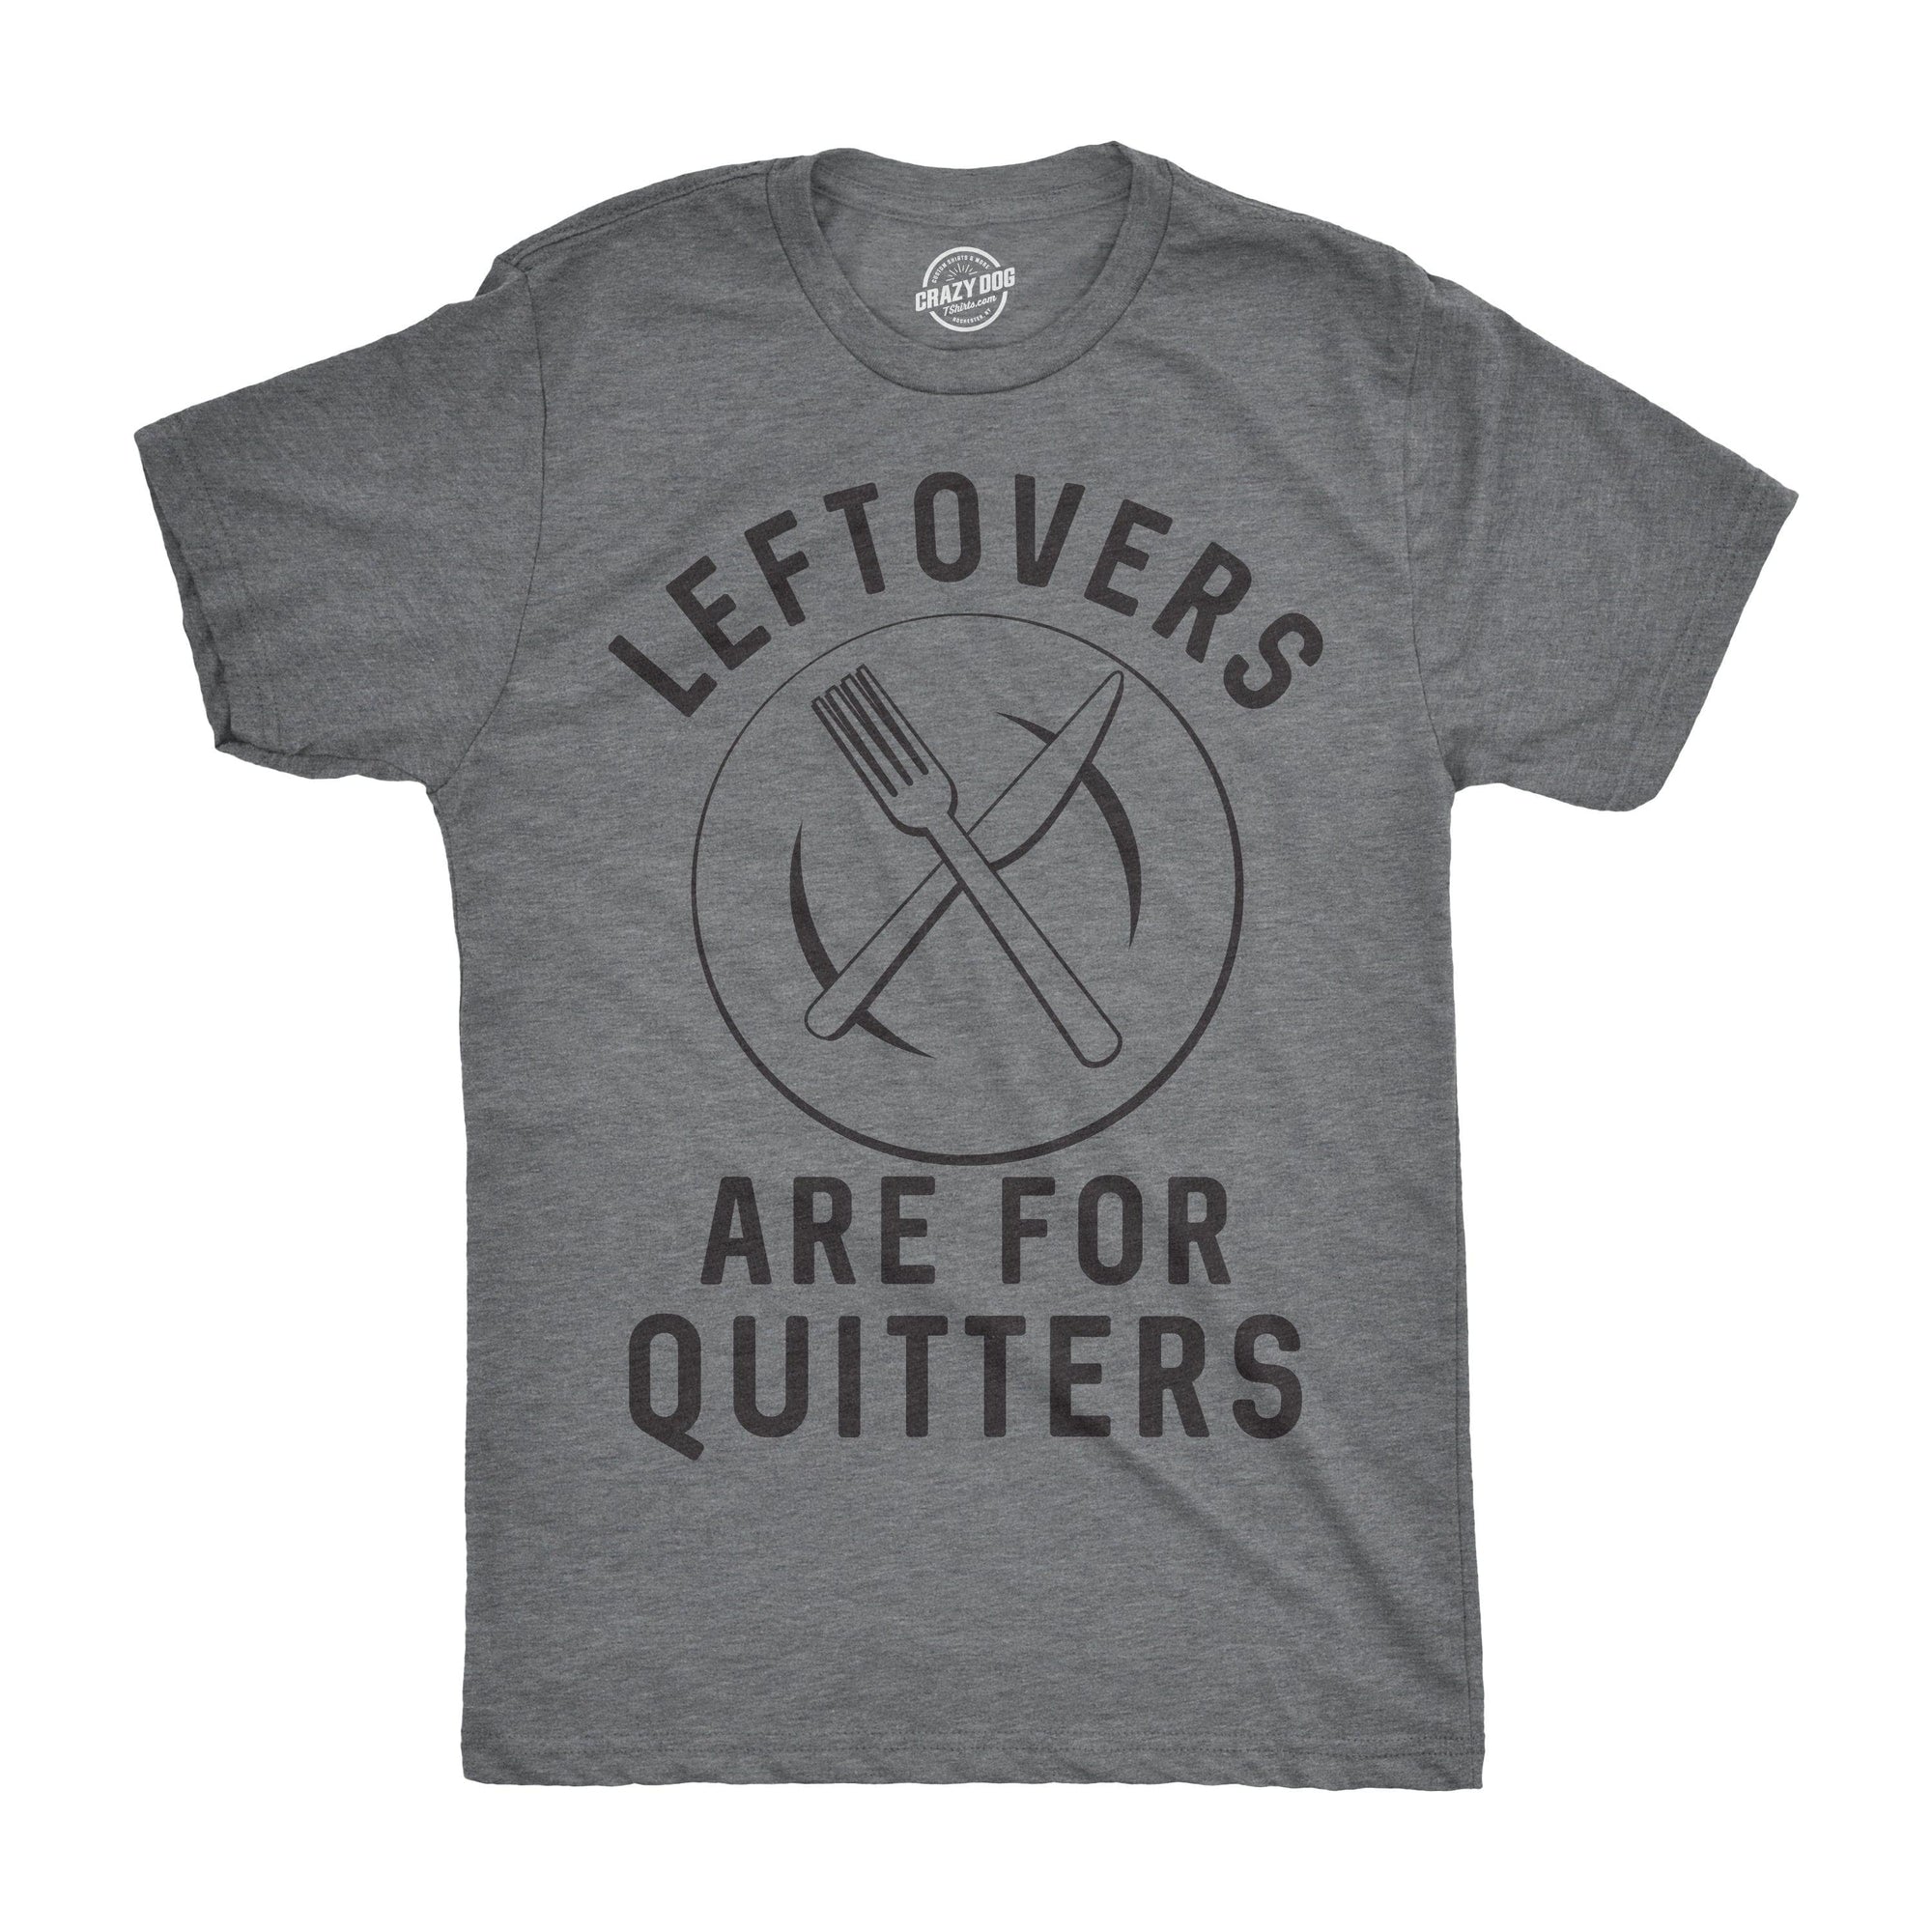 Leftovers Are For Quitters Men's Tshirt  -  Crazy Dog T-Shirts